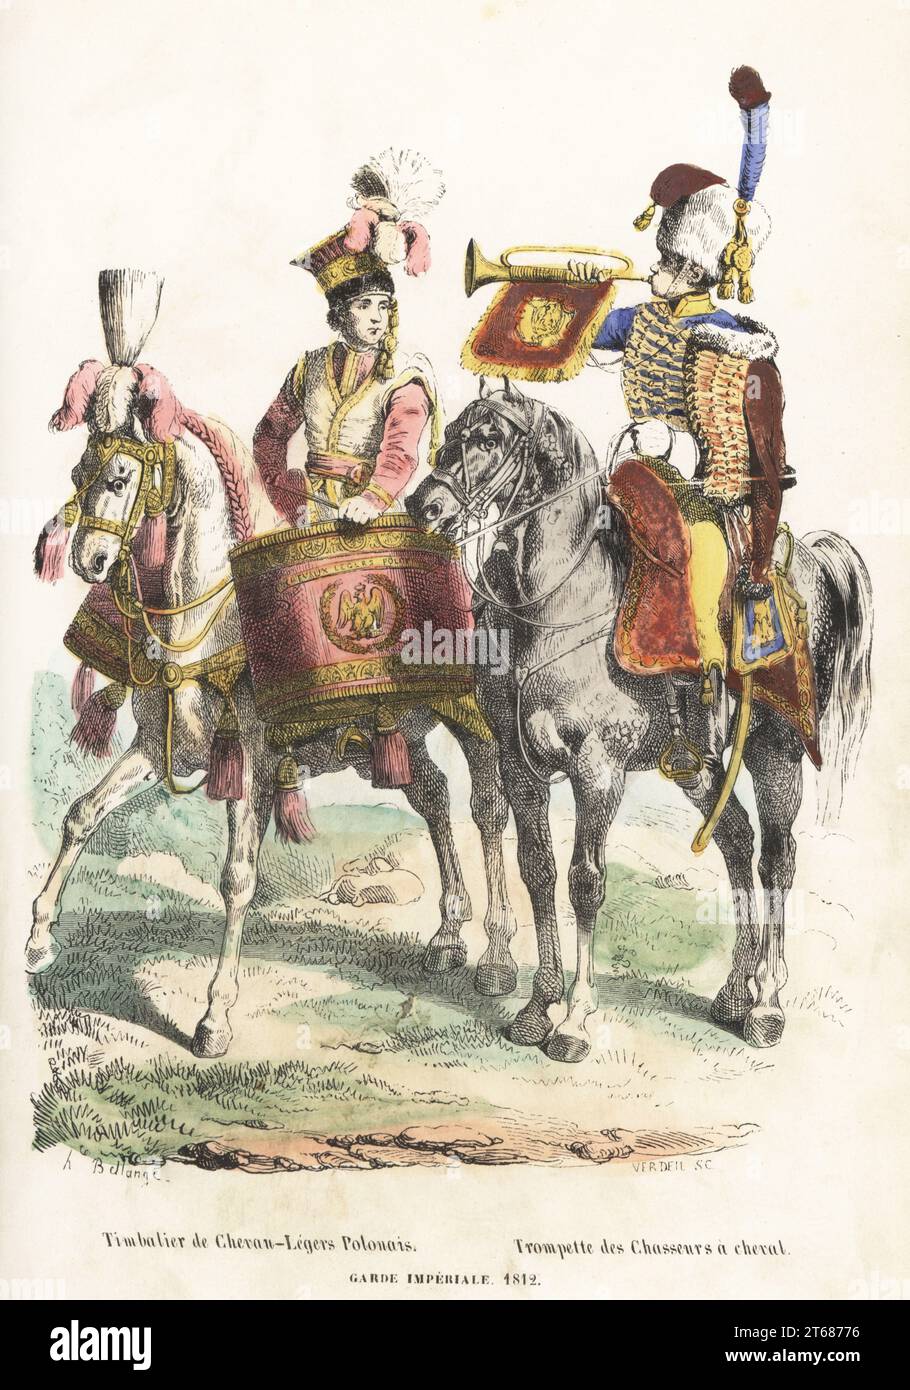 Musicians of the French Imperial Guard cavalry, 1812. Kettledrummer of the 1st Polish Light Cavalry Lancers and trumpeter of the Horse Chasseurs. Timbalier de Chevau-Legers Polonais, Trompette des Chasseurs a cheval, Garde Imperiale 1812. Handcoloured woodcut by Pierre Verdeil after an illustration by Hippolyte Bellangé from P.M. Laurent de lArdeches Histoire de Napoleon, Paris, 1840. Stock Photo